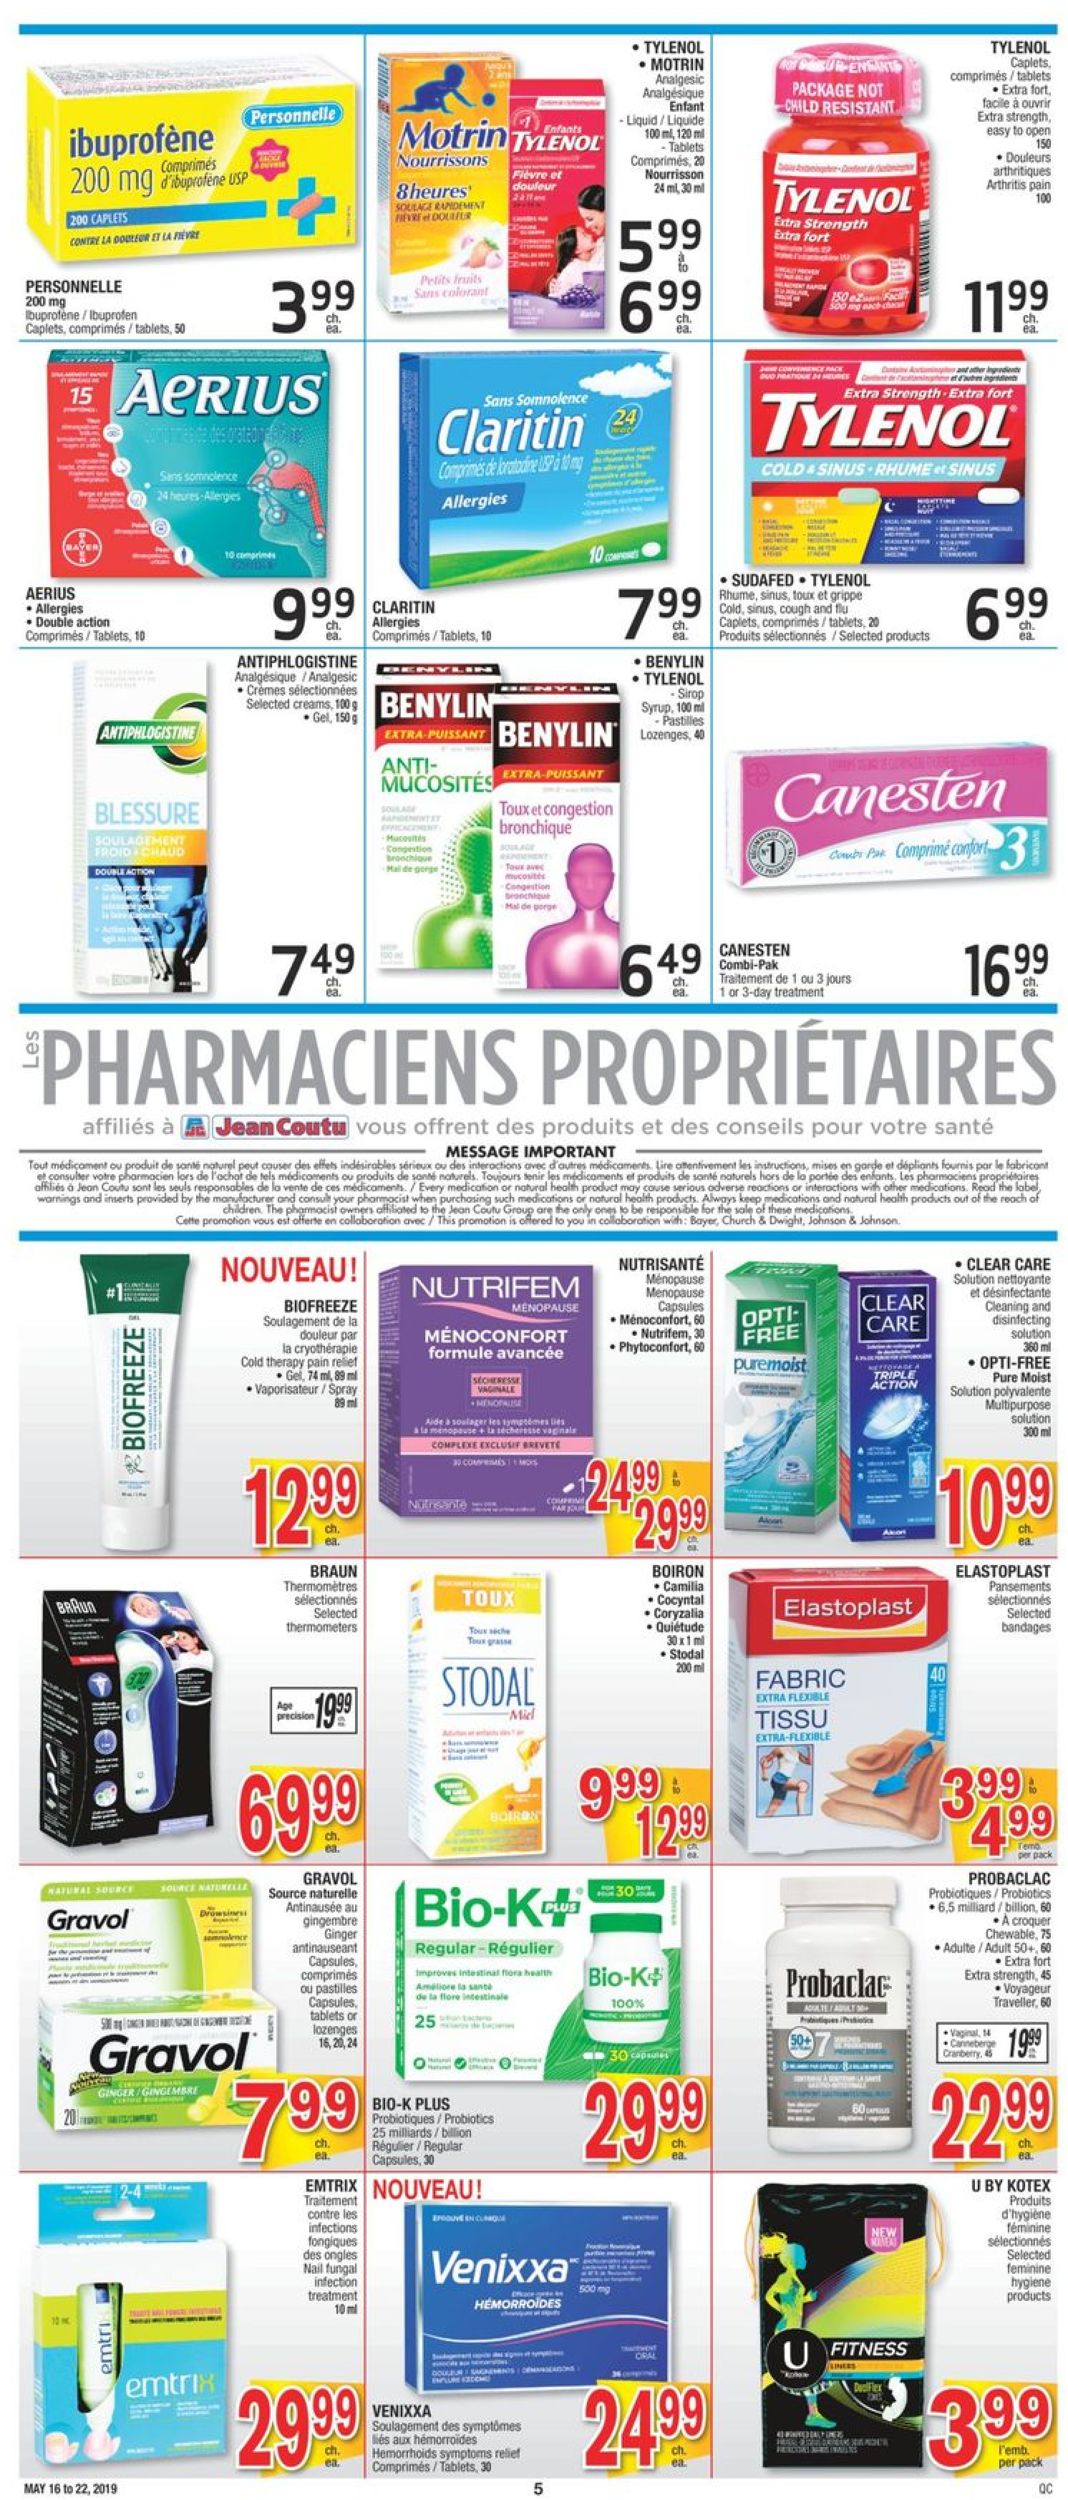 Jean Coutu Flyer - 05/16-05/22/2019 (Page 4)